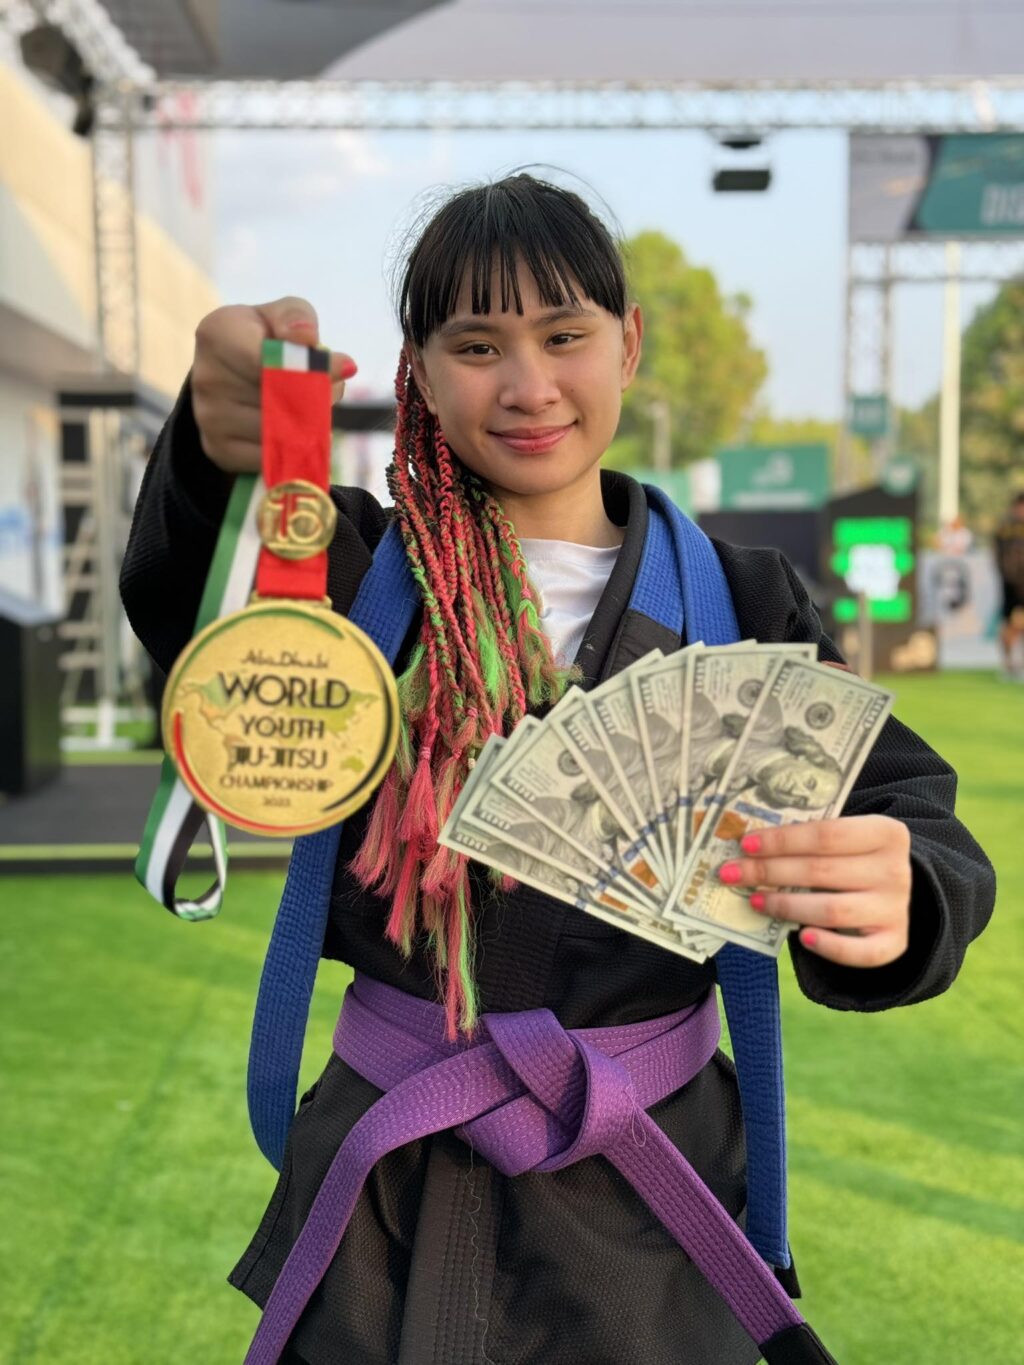 Ellise Xoe Malilay proudly shows her gold medal and cash prize she earned for topping her category in the Abu Dhabi World Youth Jiu-Jitsu Championships in Abu Dhabi, UAE.